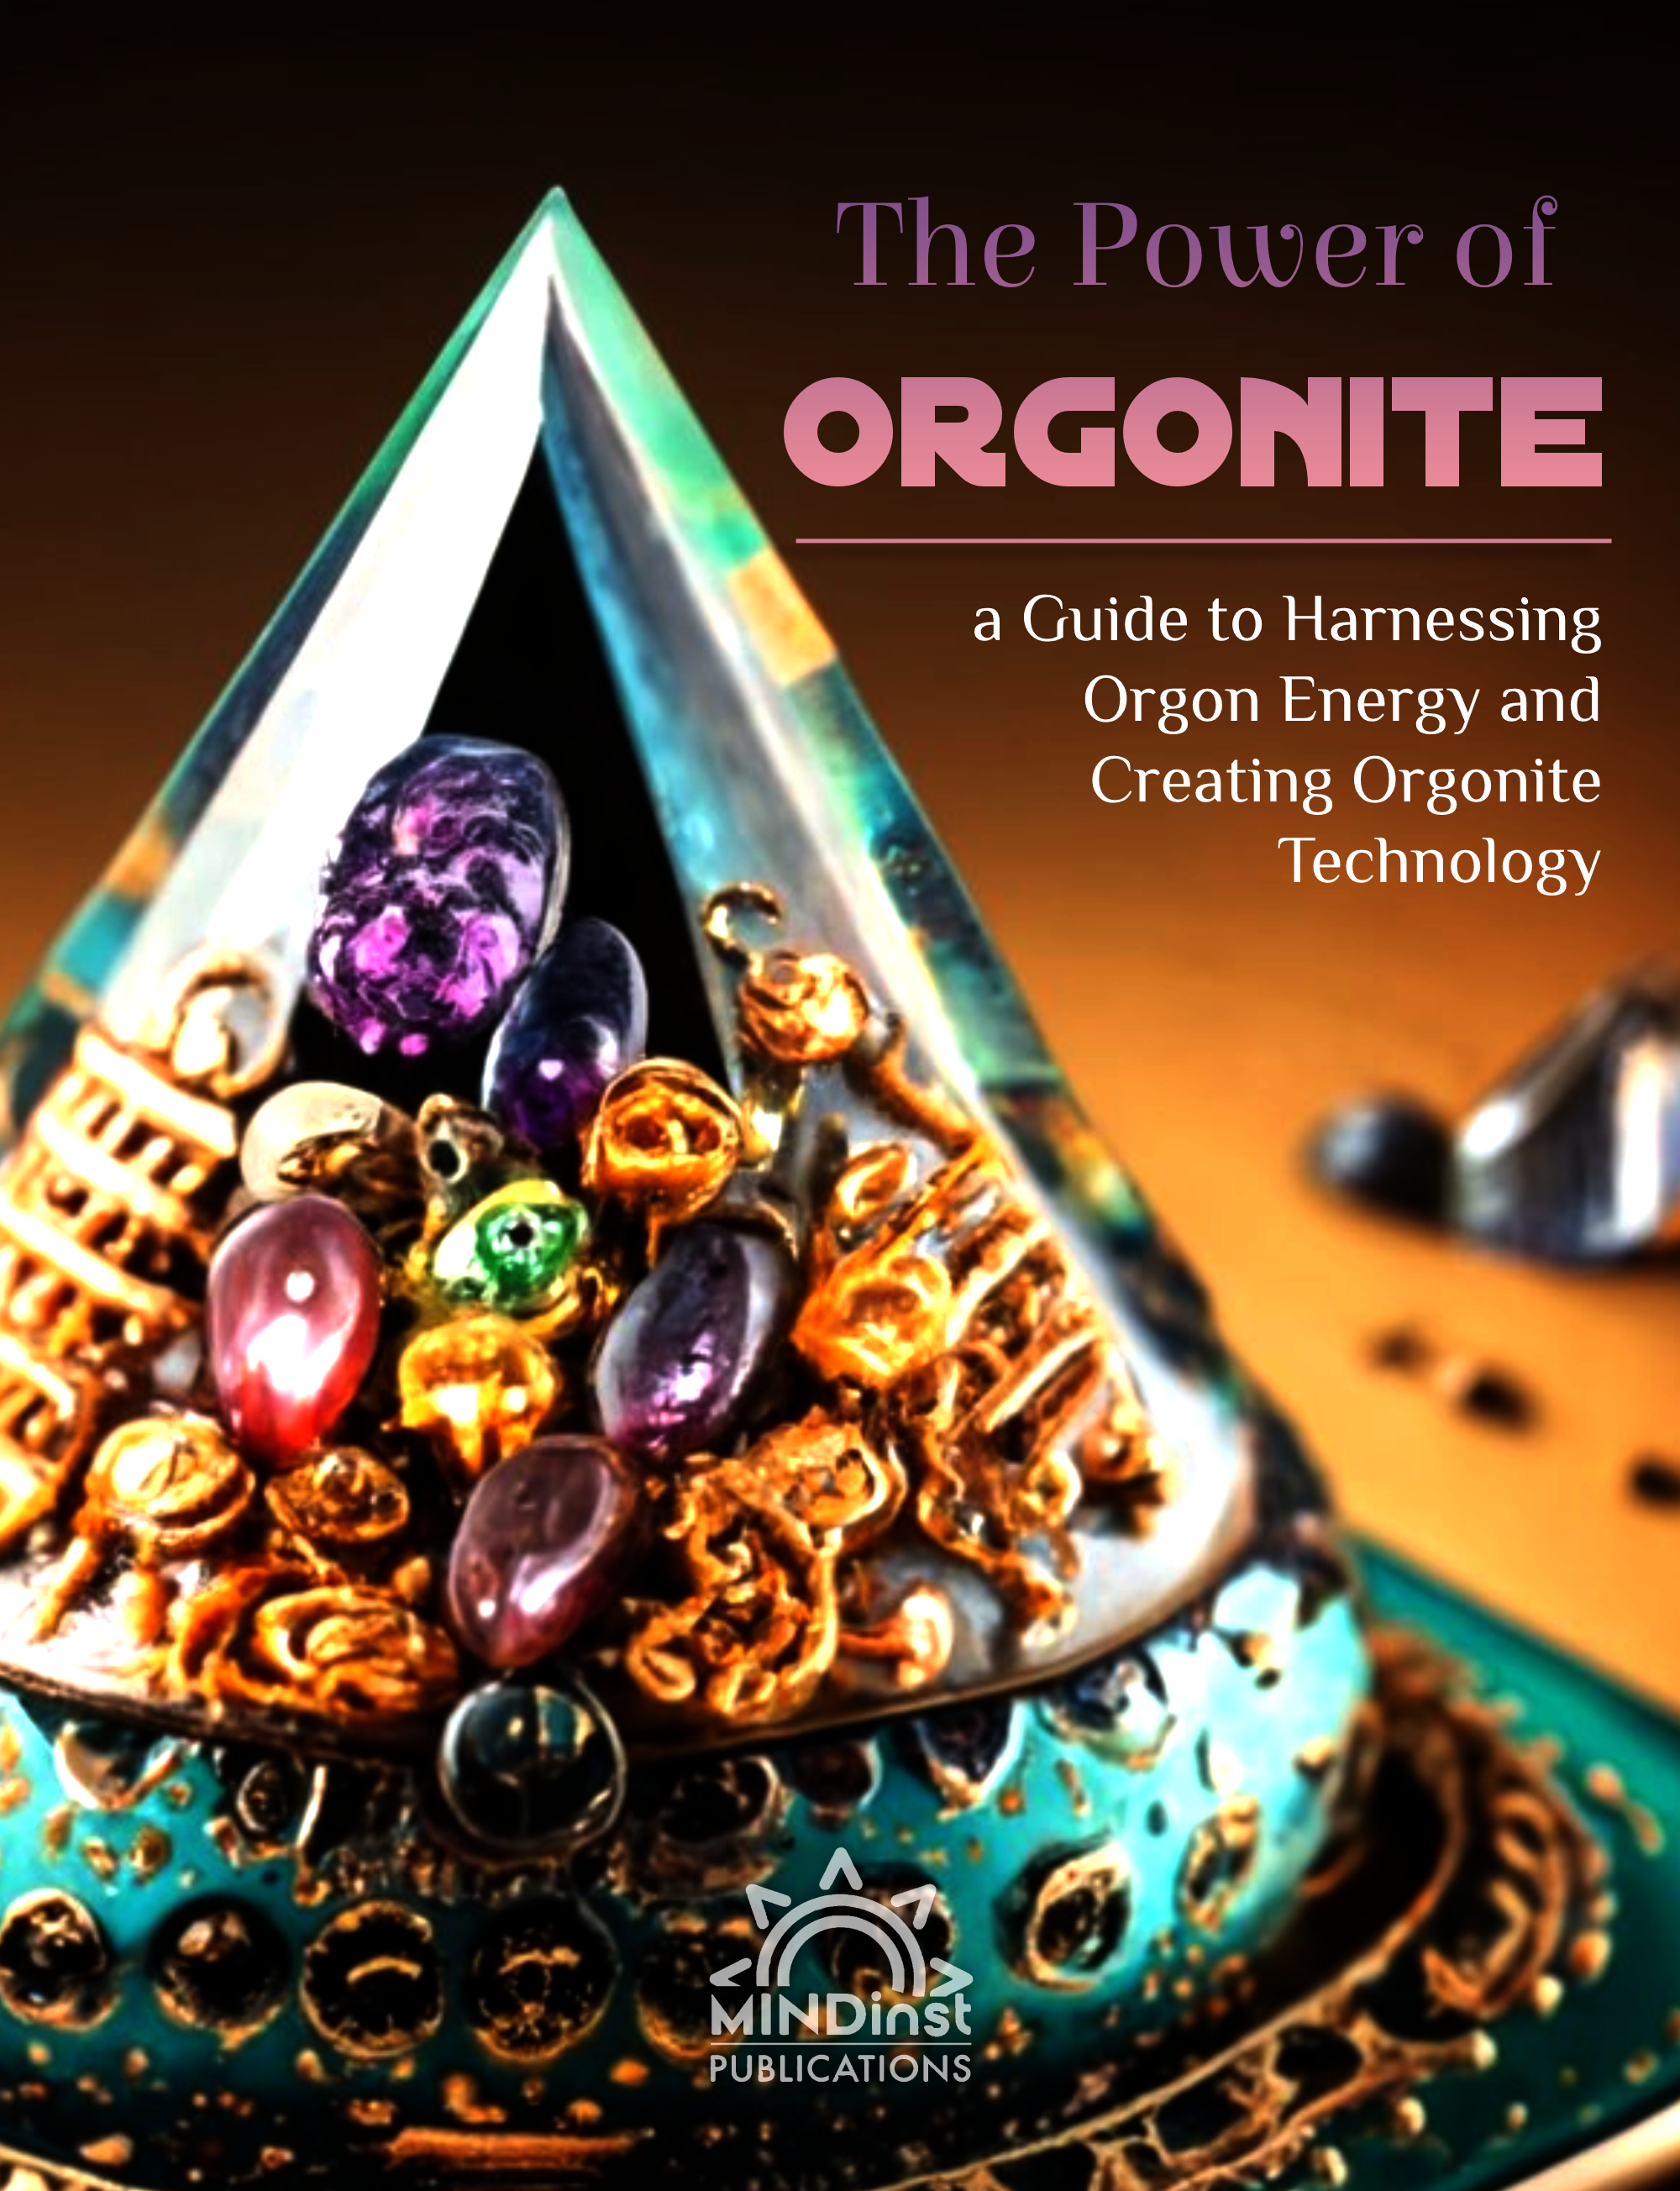 The Power of Orgonite: a Guide to Harnessing Orgon Energy and Creating Orgonite Technology